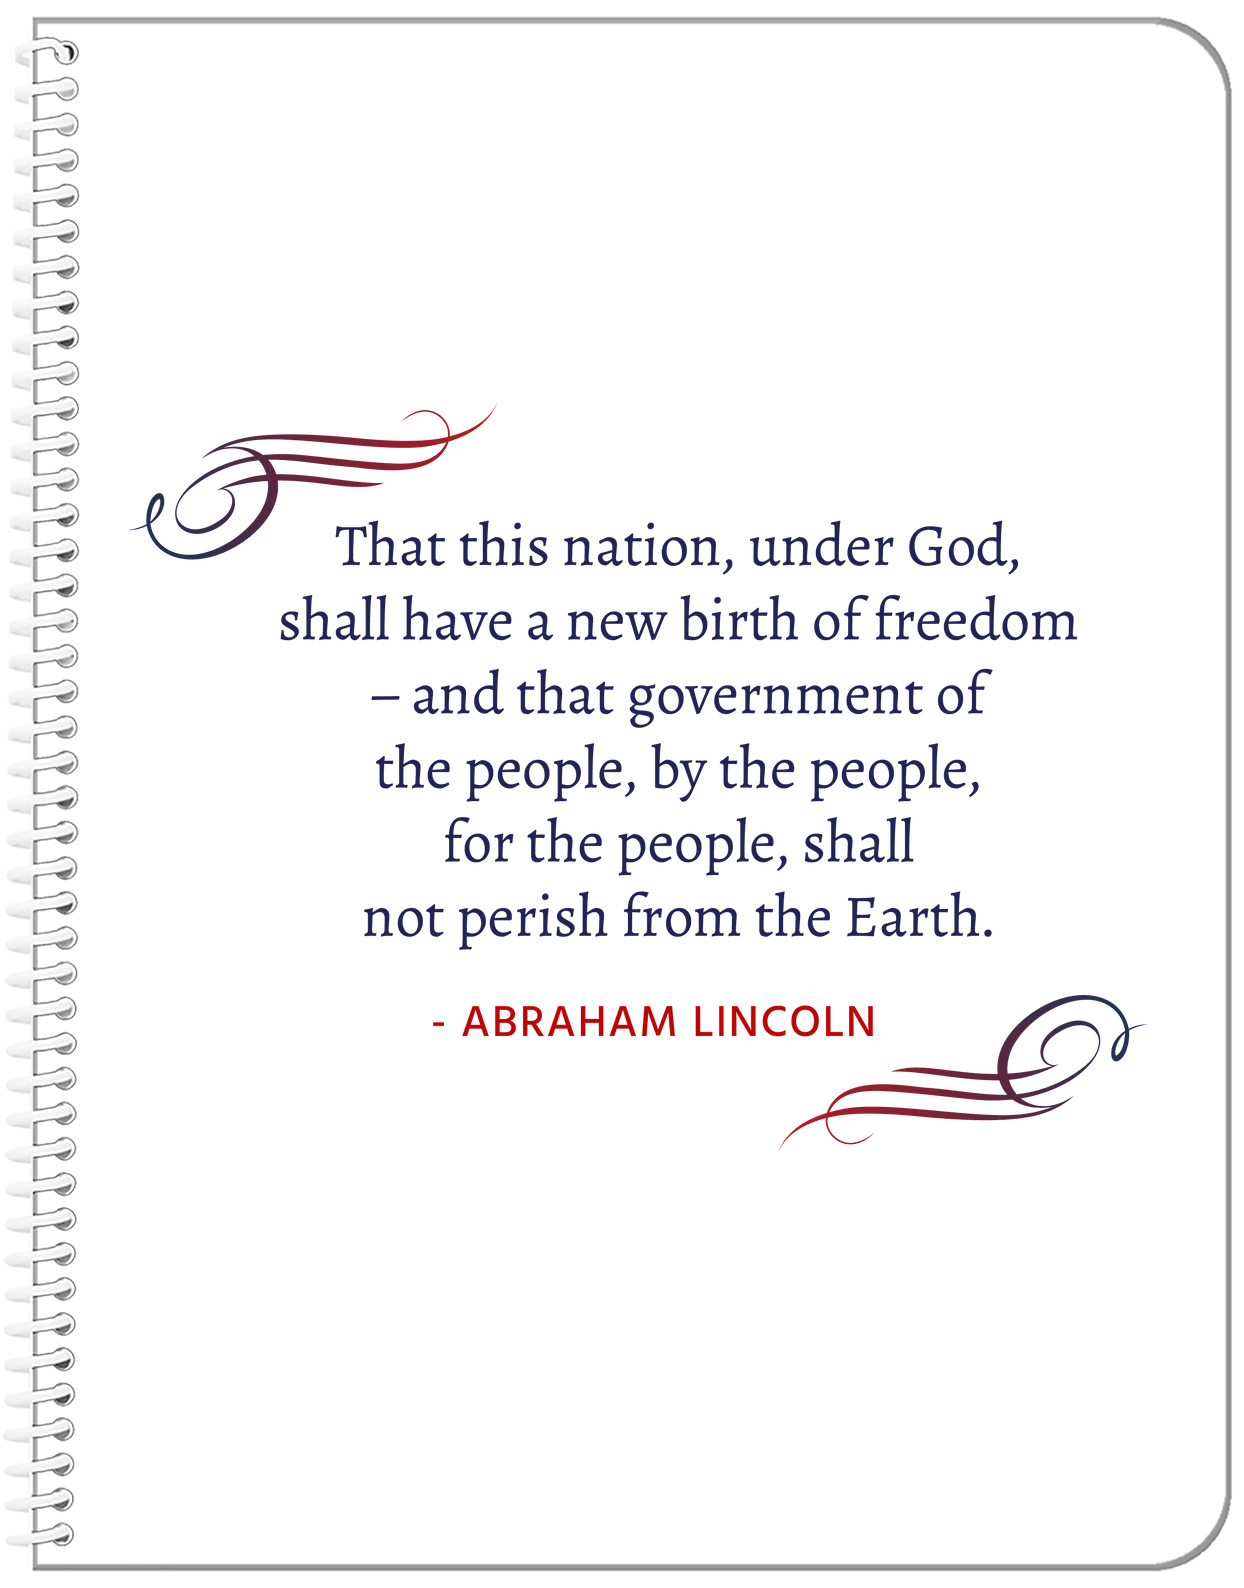 Famous Quotes Notebook - Abraham Lincoln - Front View